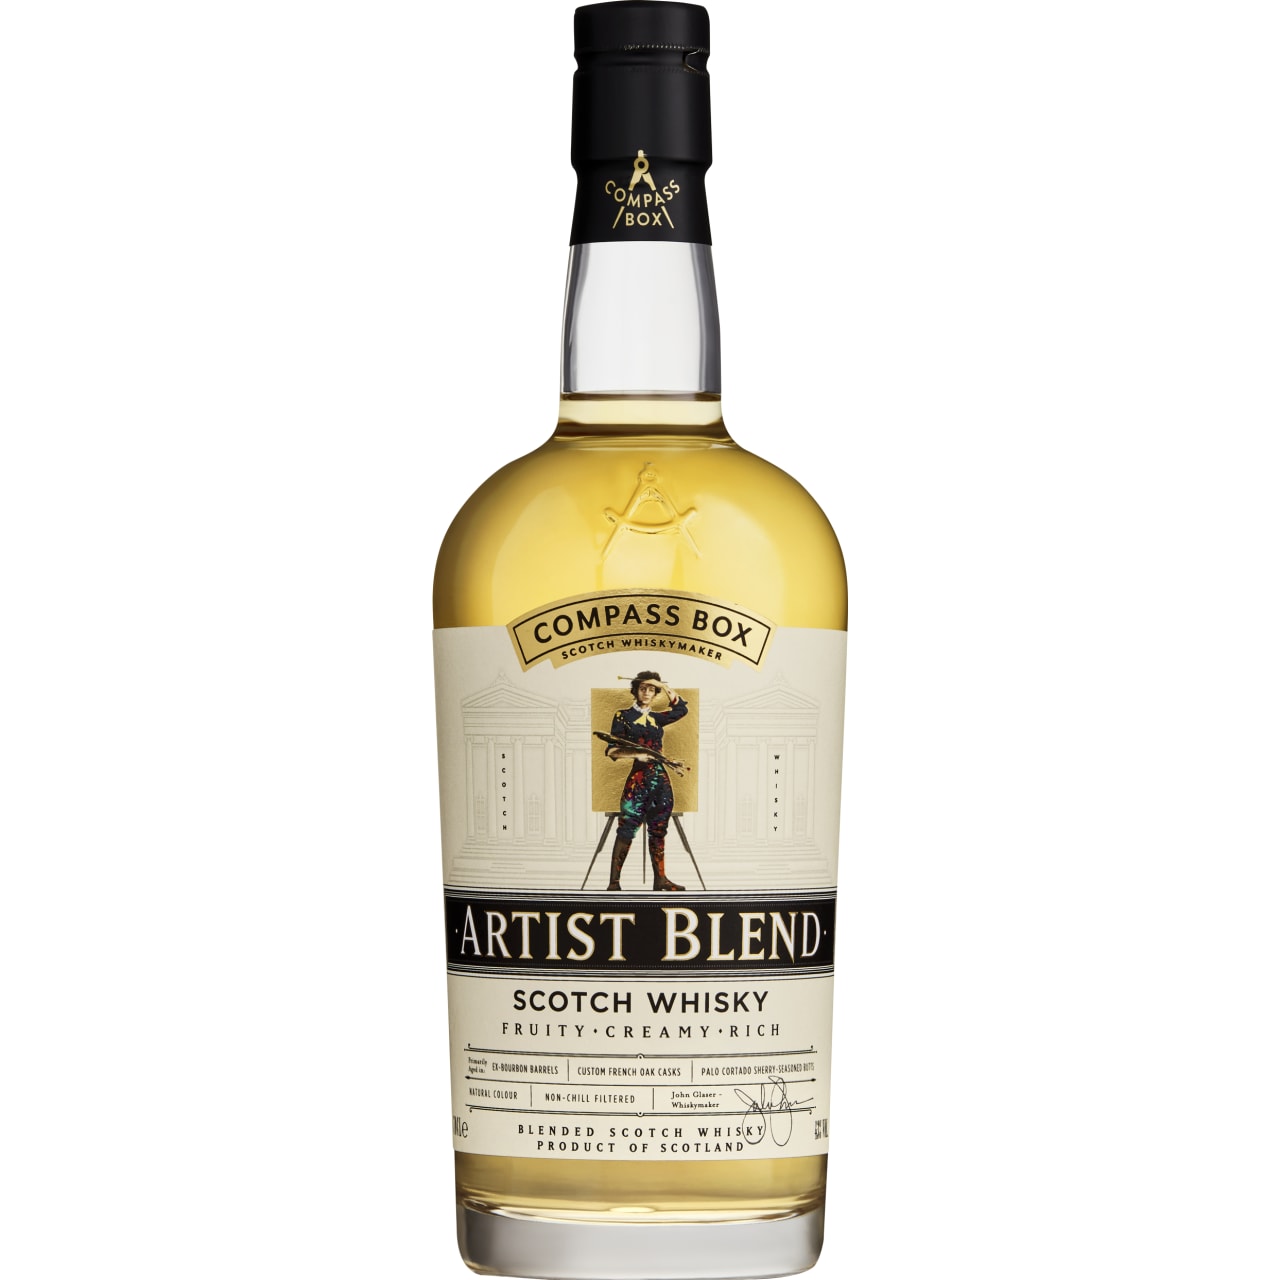 A rich, full-bodied whisky with lots of fruit and spice.